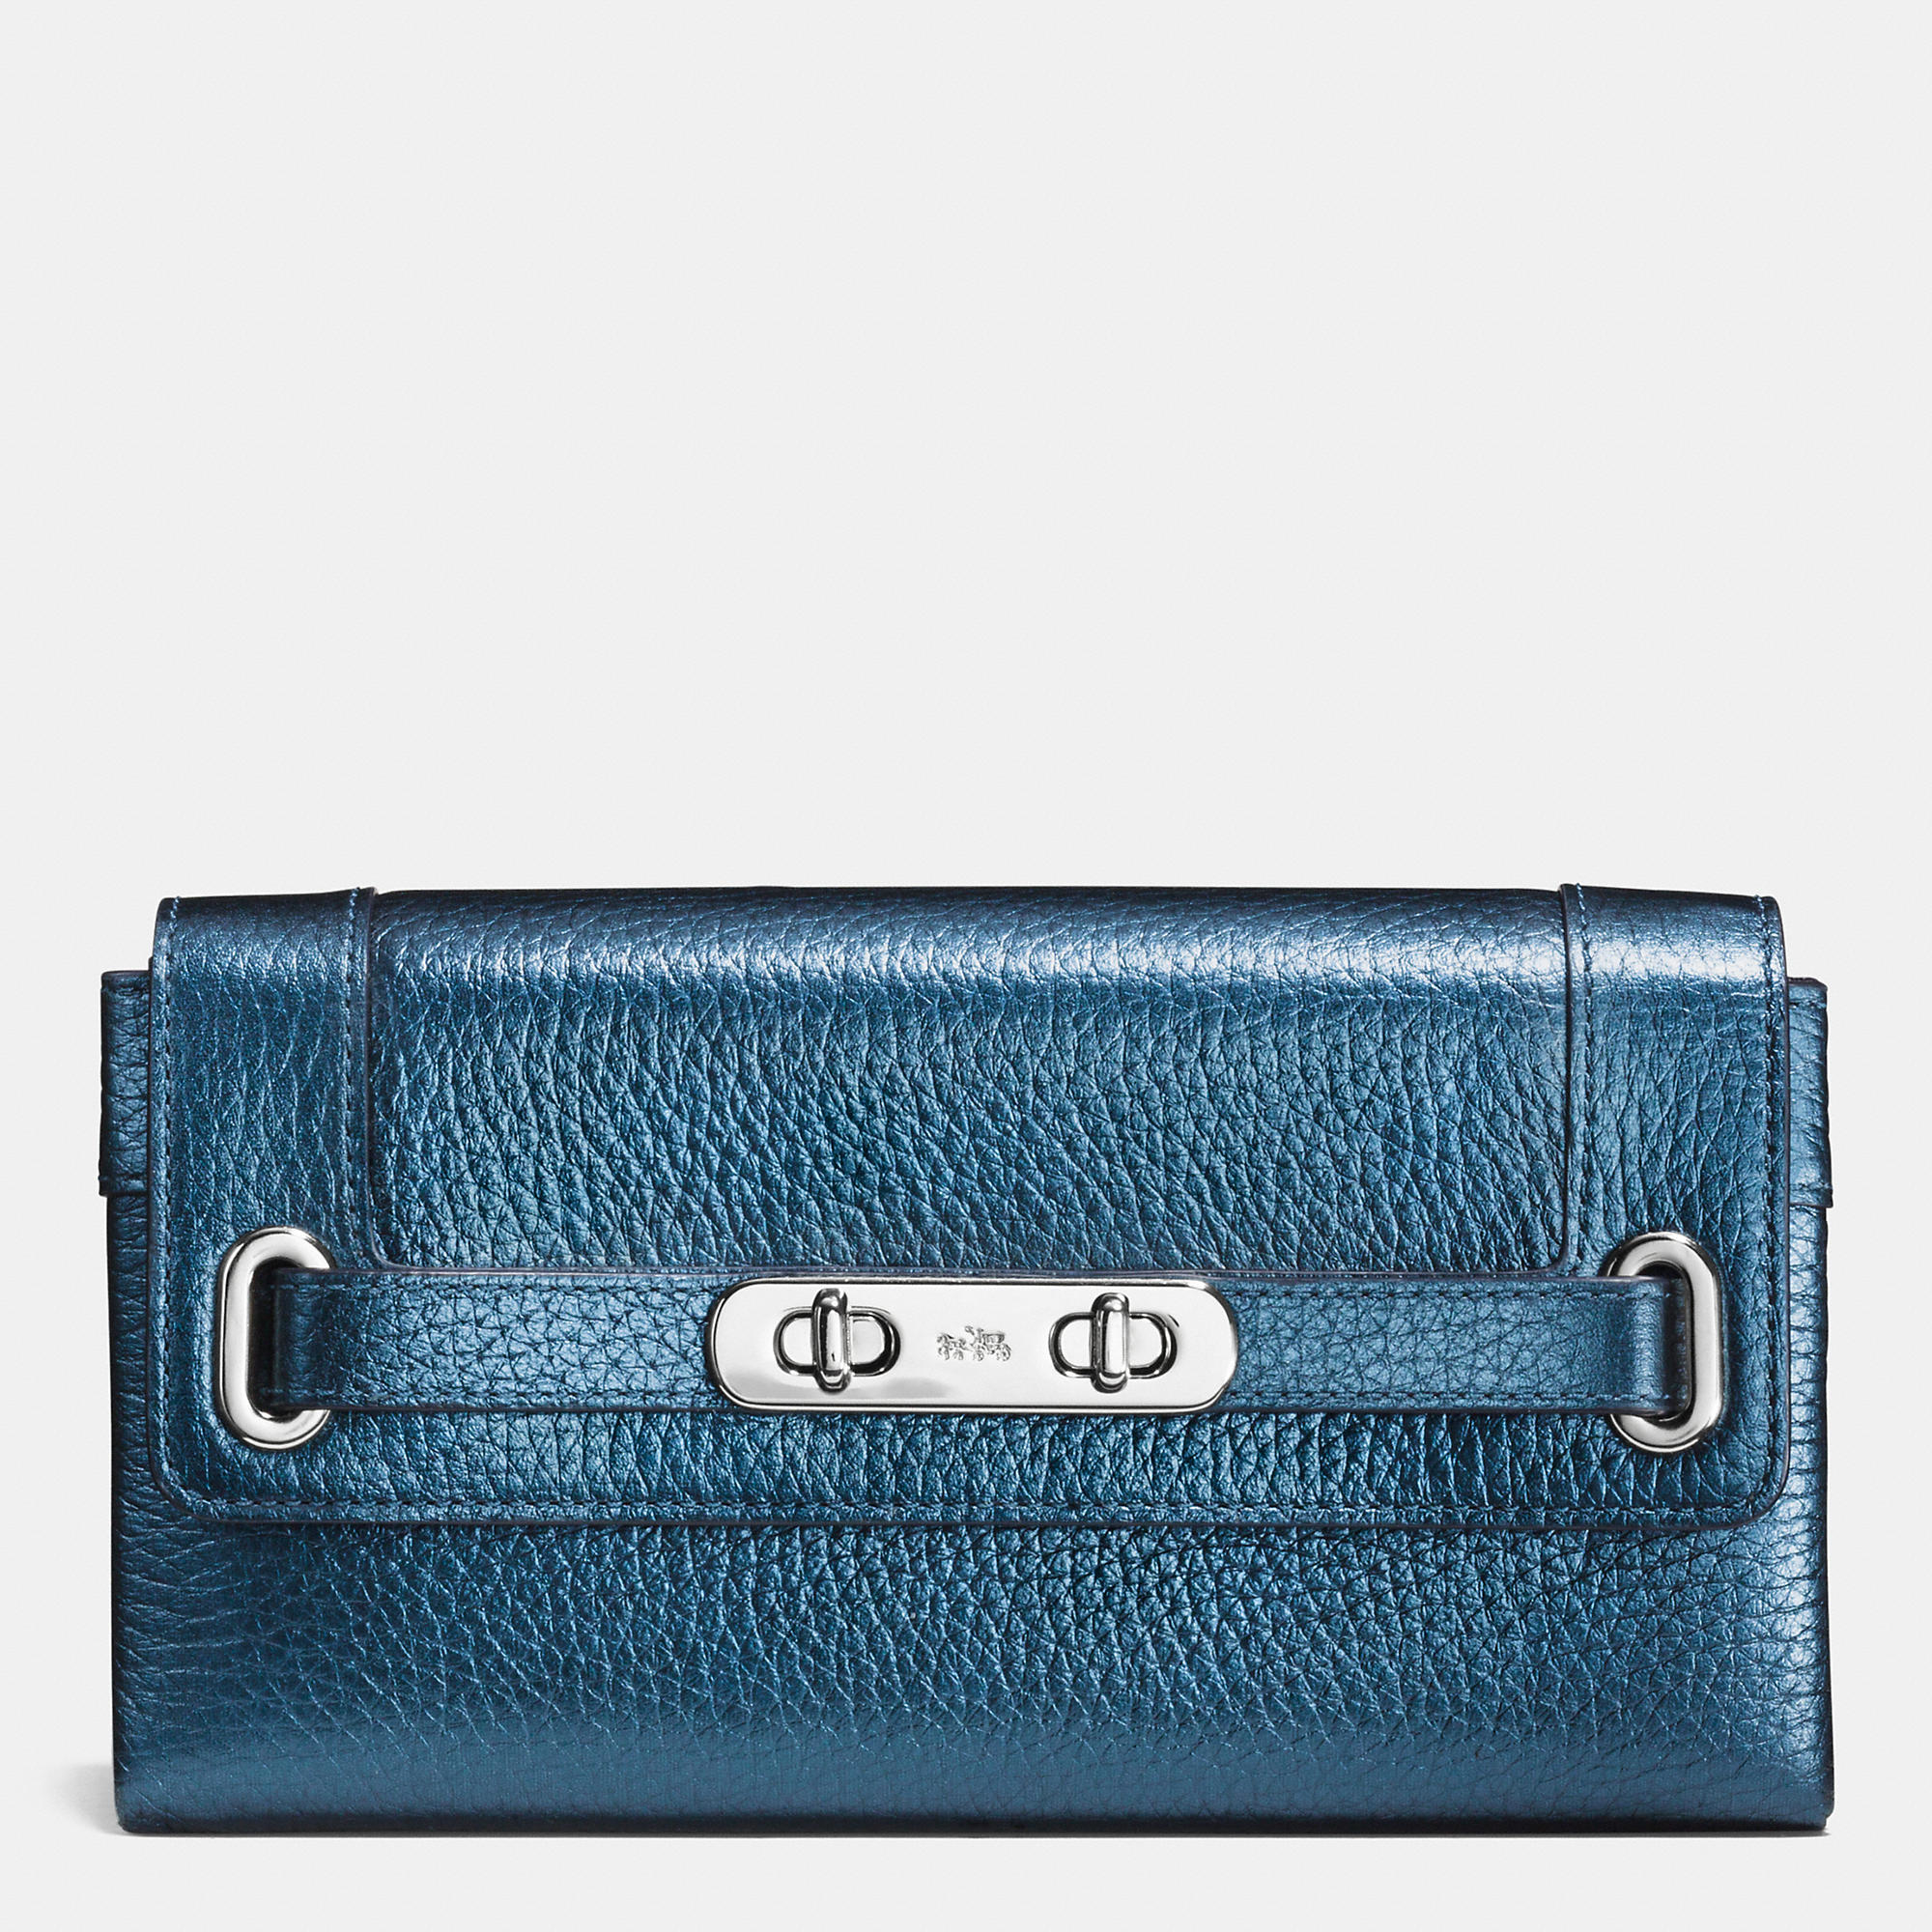 Lyst - Coach Swagger Wallet In Metallic Pebble Leather in Blue